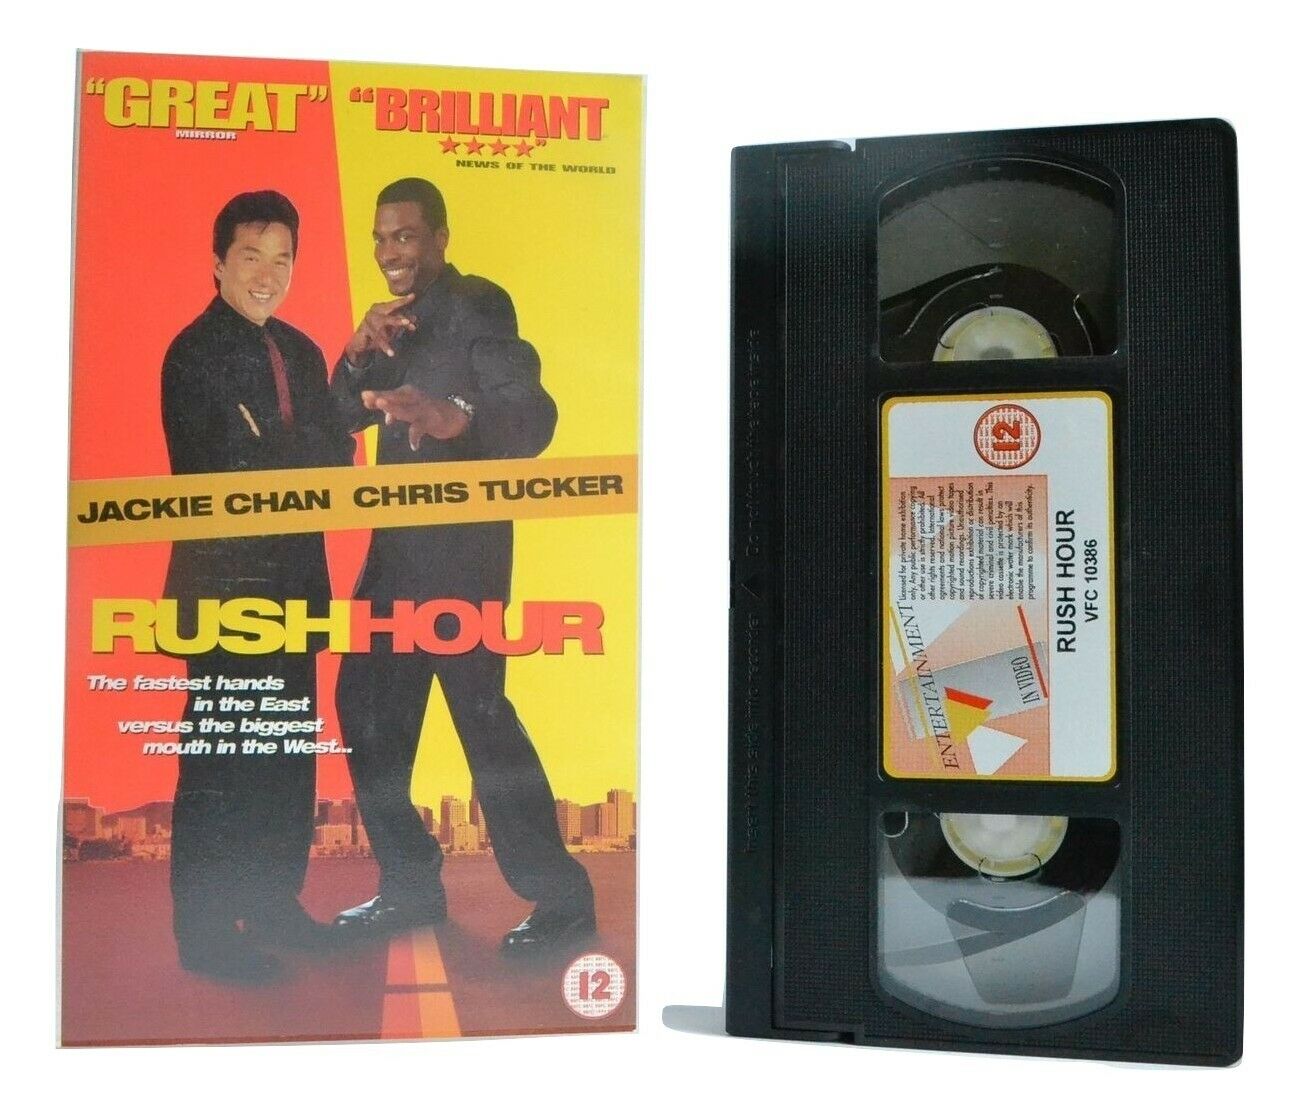 Rush Hour (1998): Buddy Cop Action Comedy - Jackie Chan/Chris Tucker - Pal VHS-